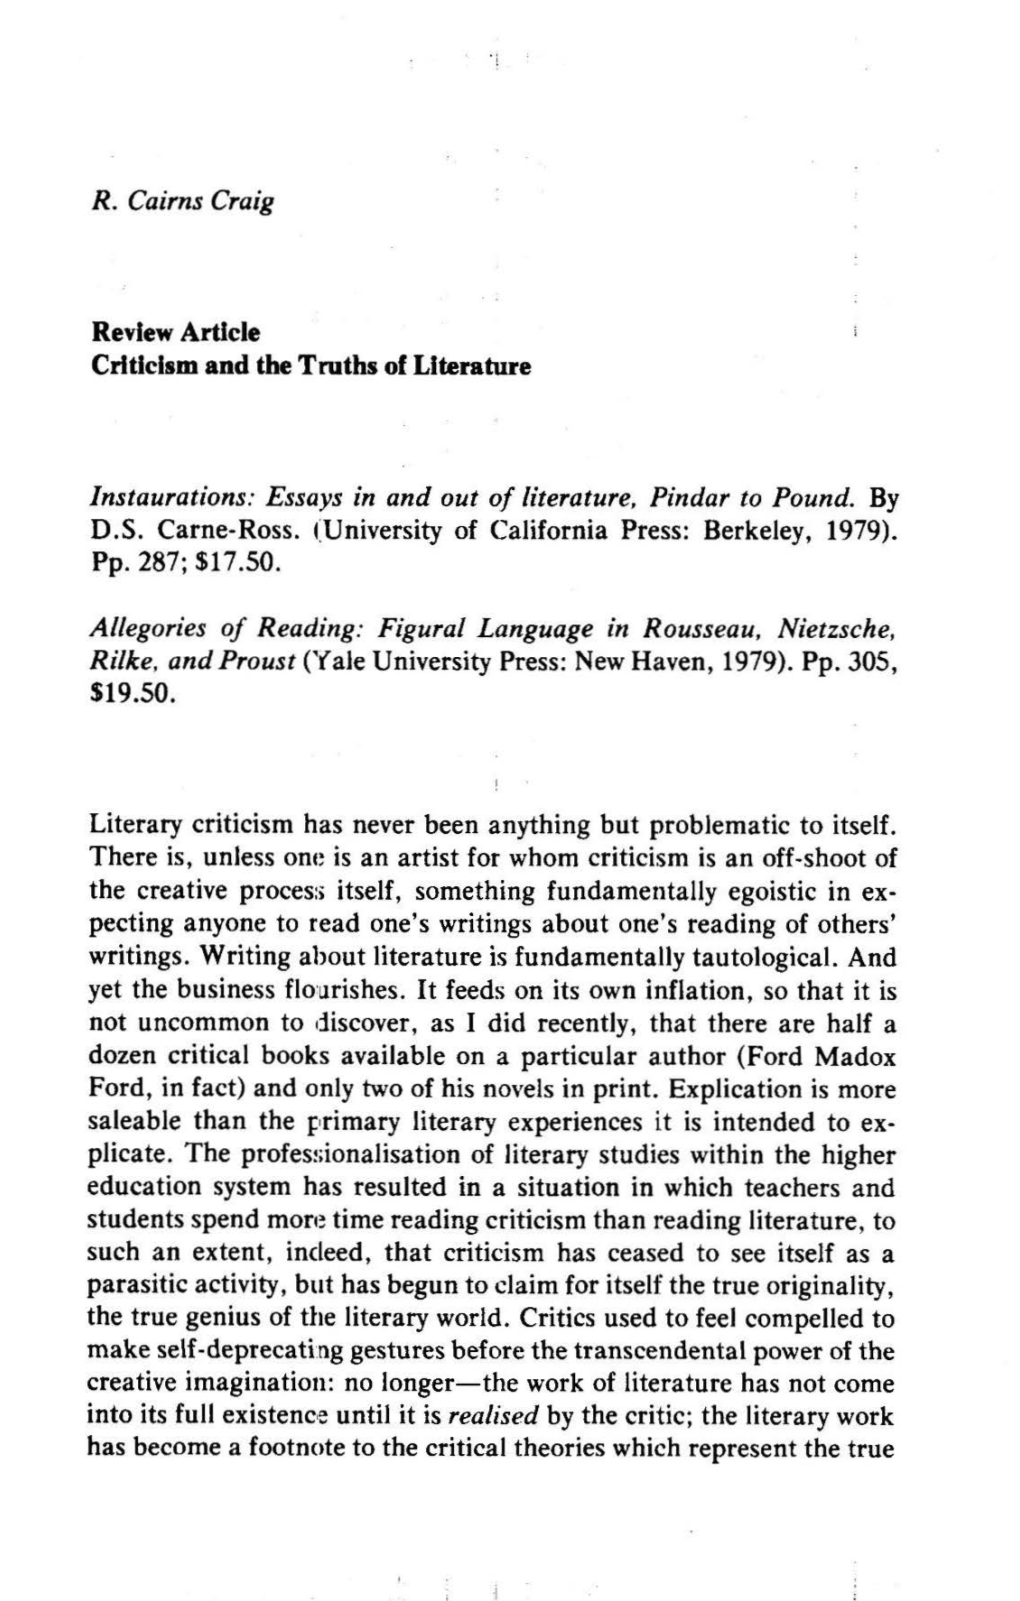 R. Cairns Craig Review Article Crltlclsm and the Truths of Literature